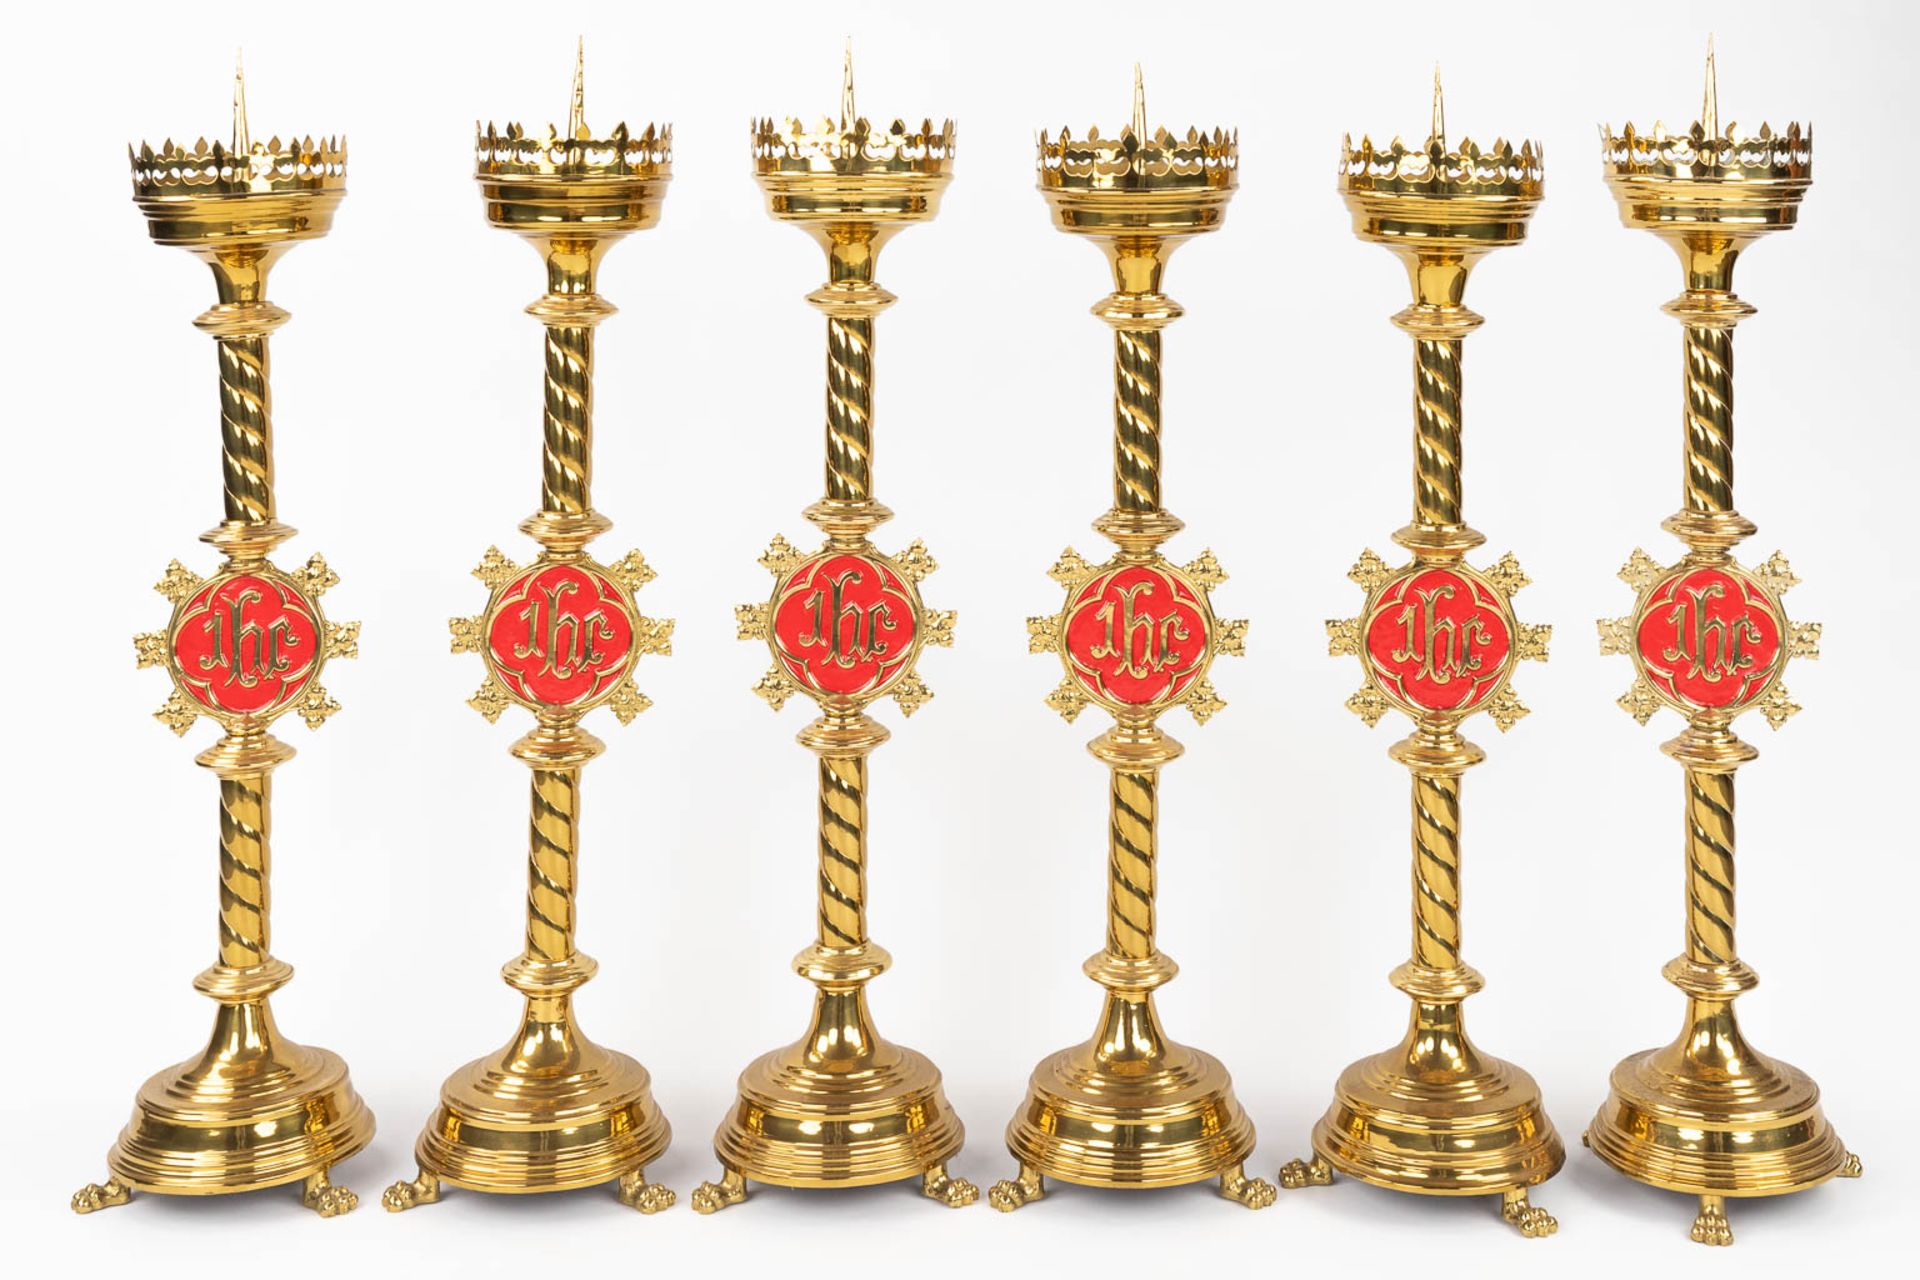 A set of 6 Church candlesticks with red IHS logo. (H:80 x D:20 cm) - Image 3 of 11